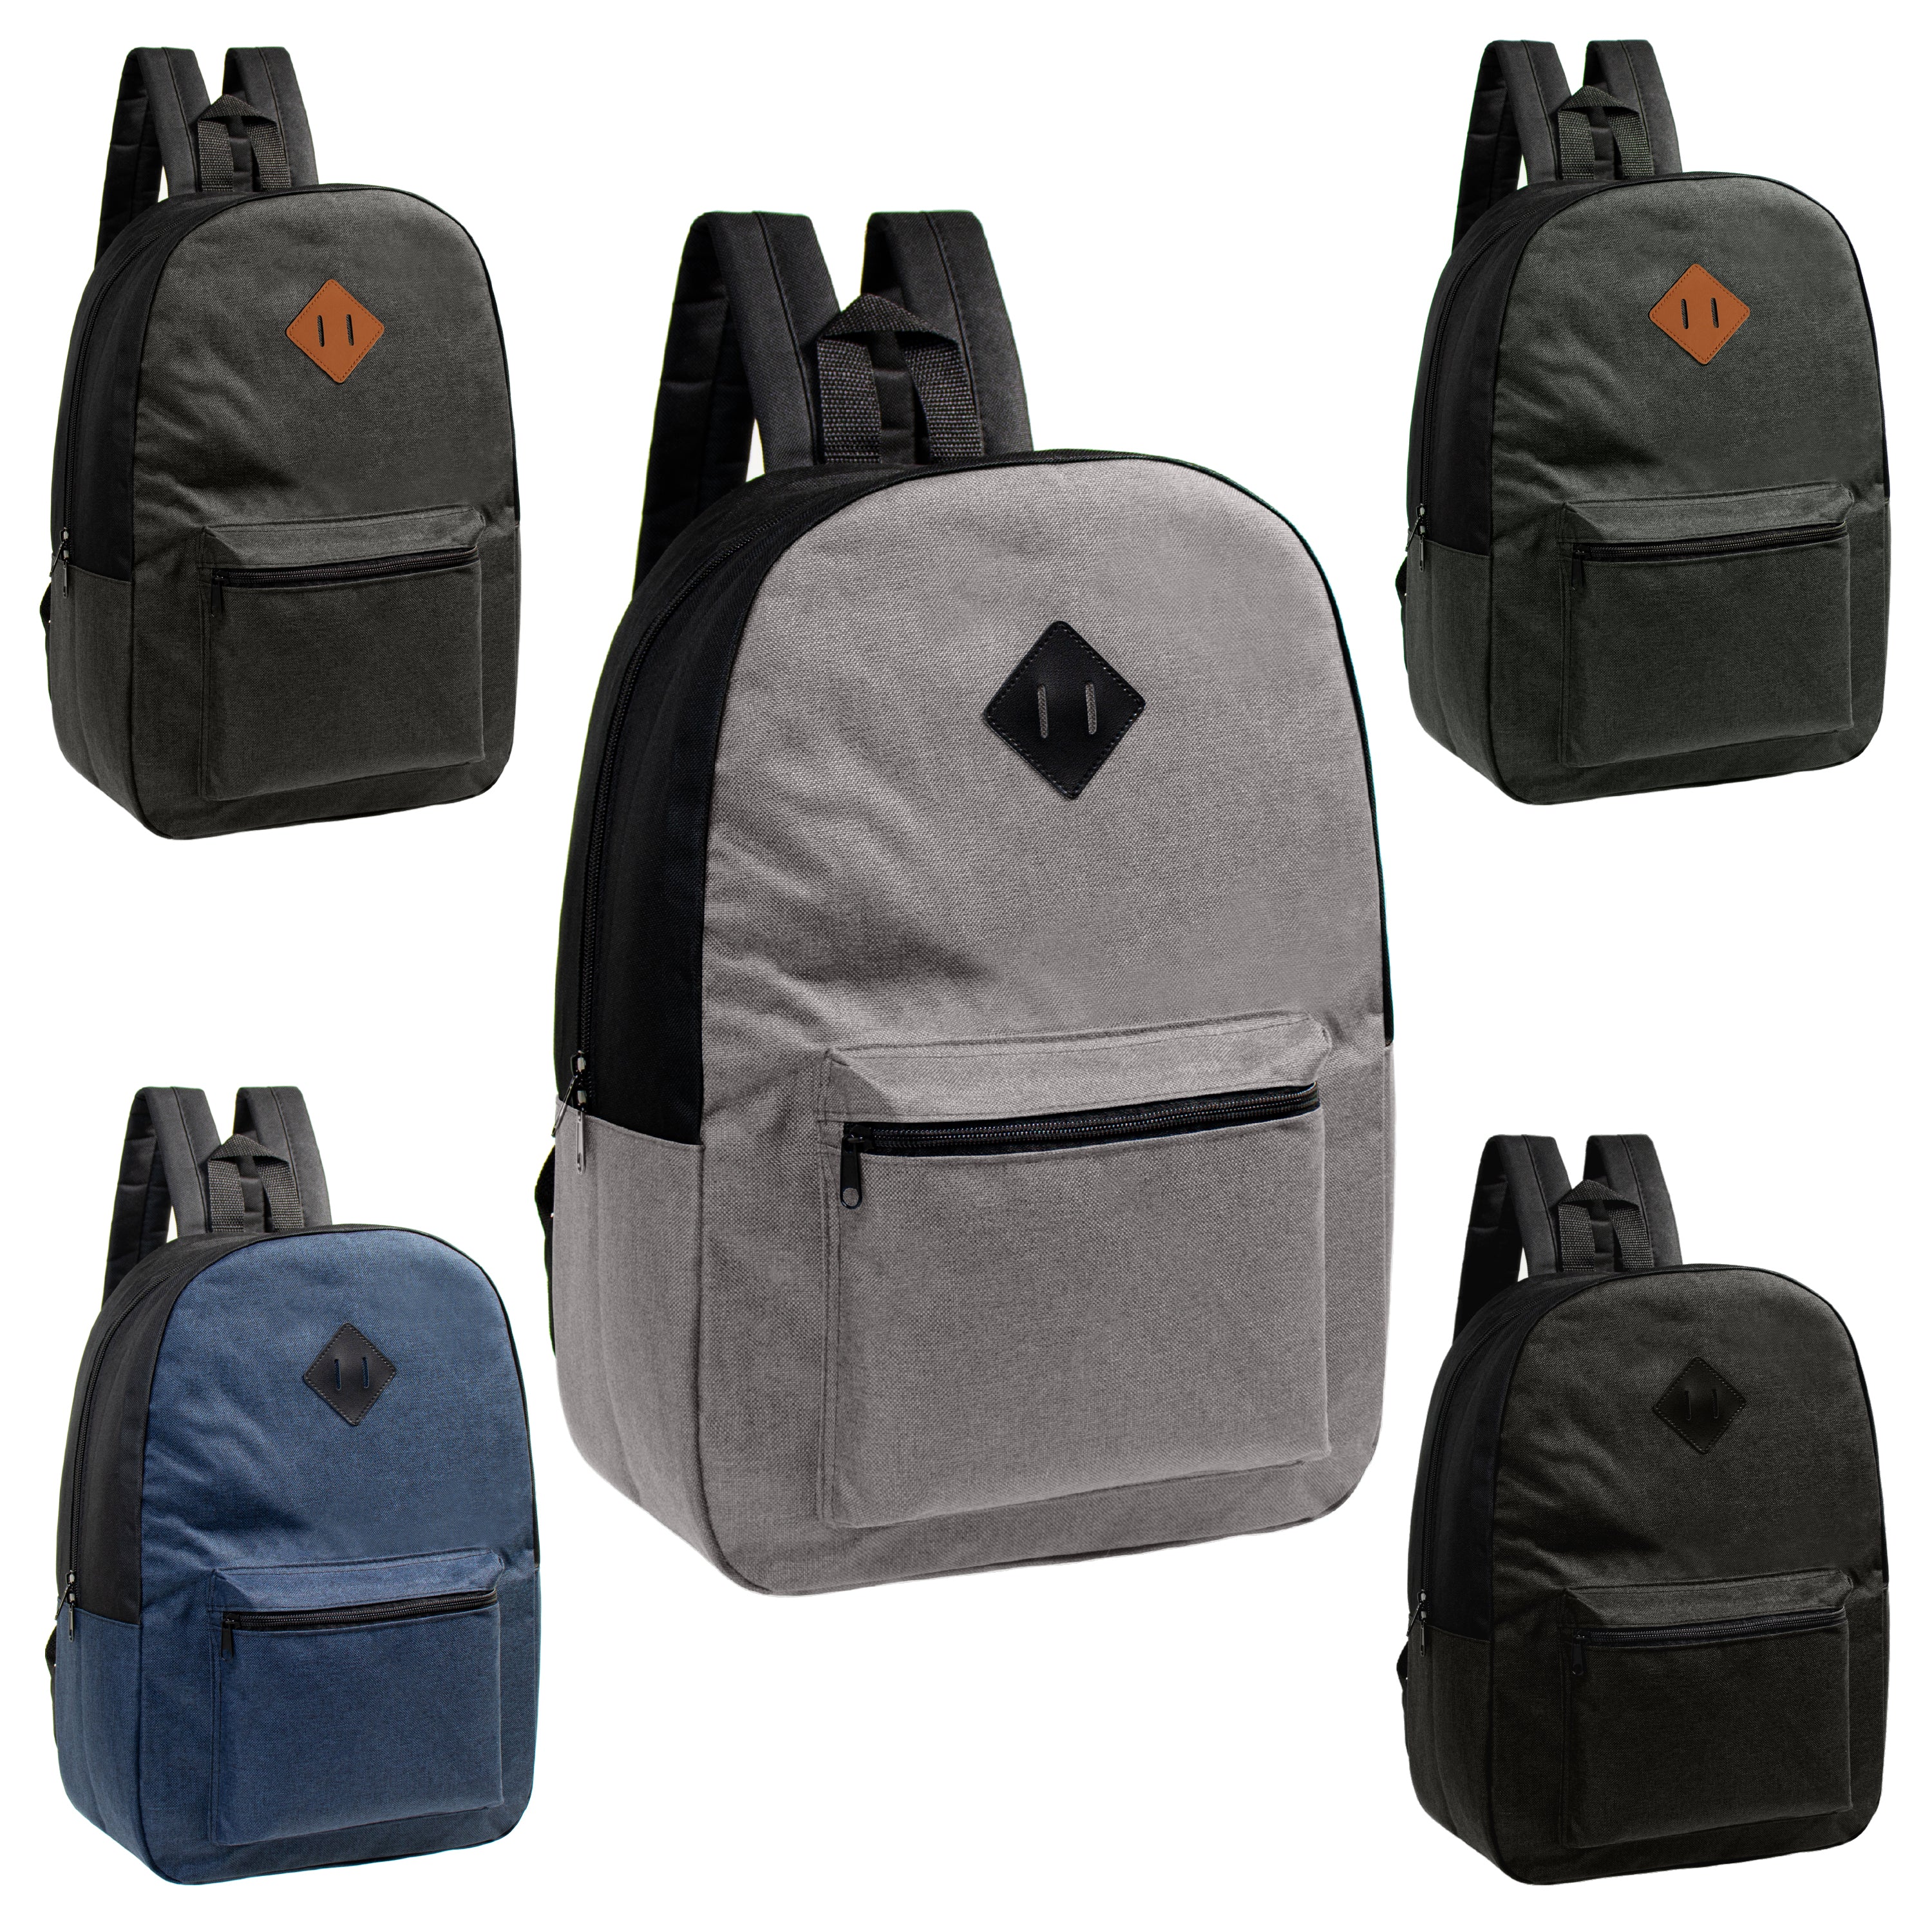 17" Kids Basic Wholesale Backpack in Assorted 5 Colors Diamond Patch - Bulk Case of 24 Backpacks